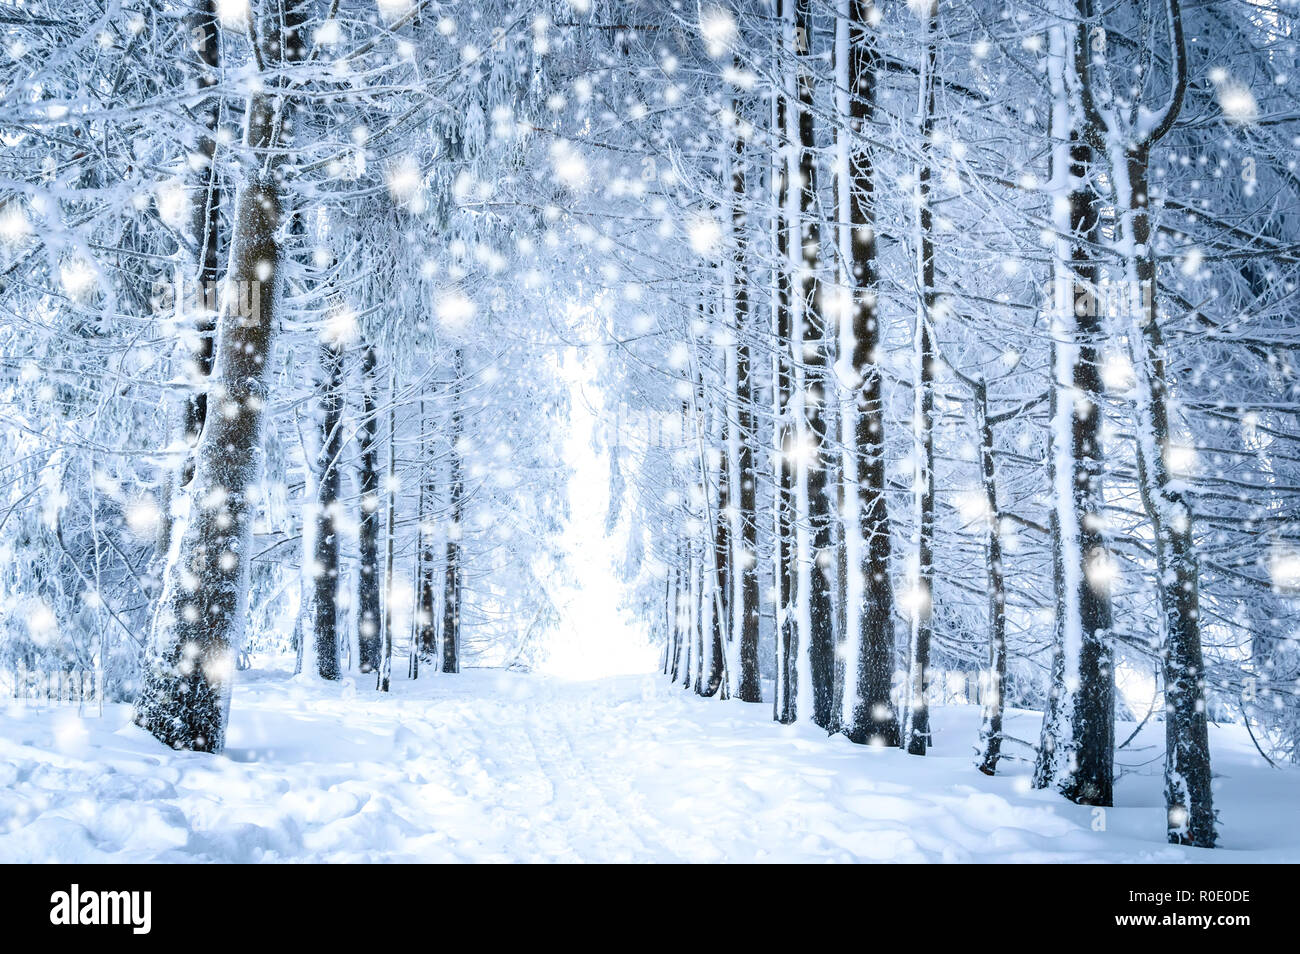 Magical winter landscape: path between snowy trees in forest with falling snow Stock Photo